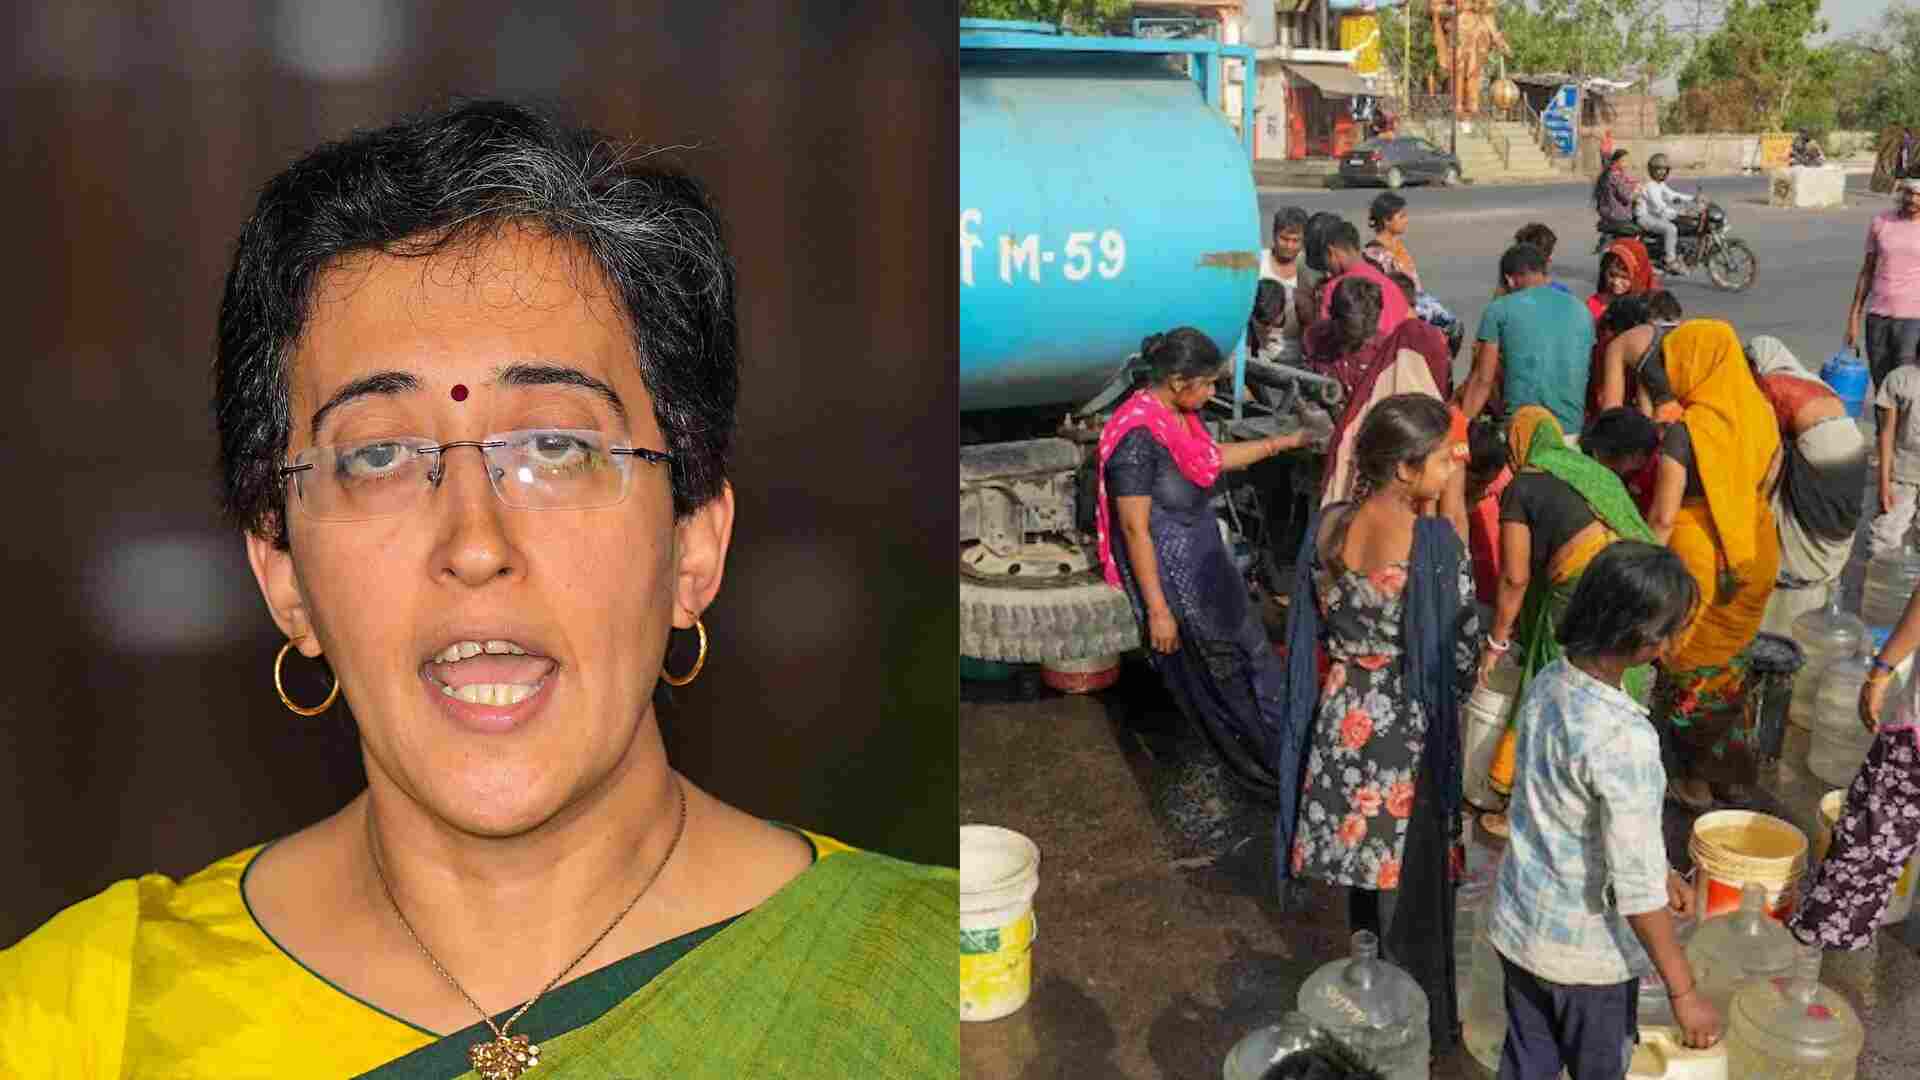 Delhi Water Minister Atishi Requests Urgent Meeting With LG As City’s Water Crisis Escalates